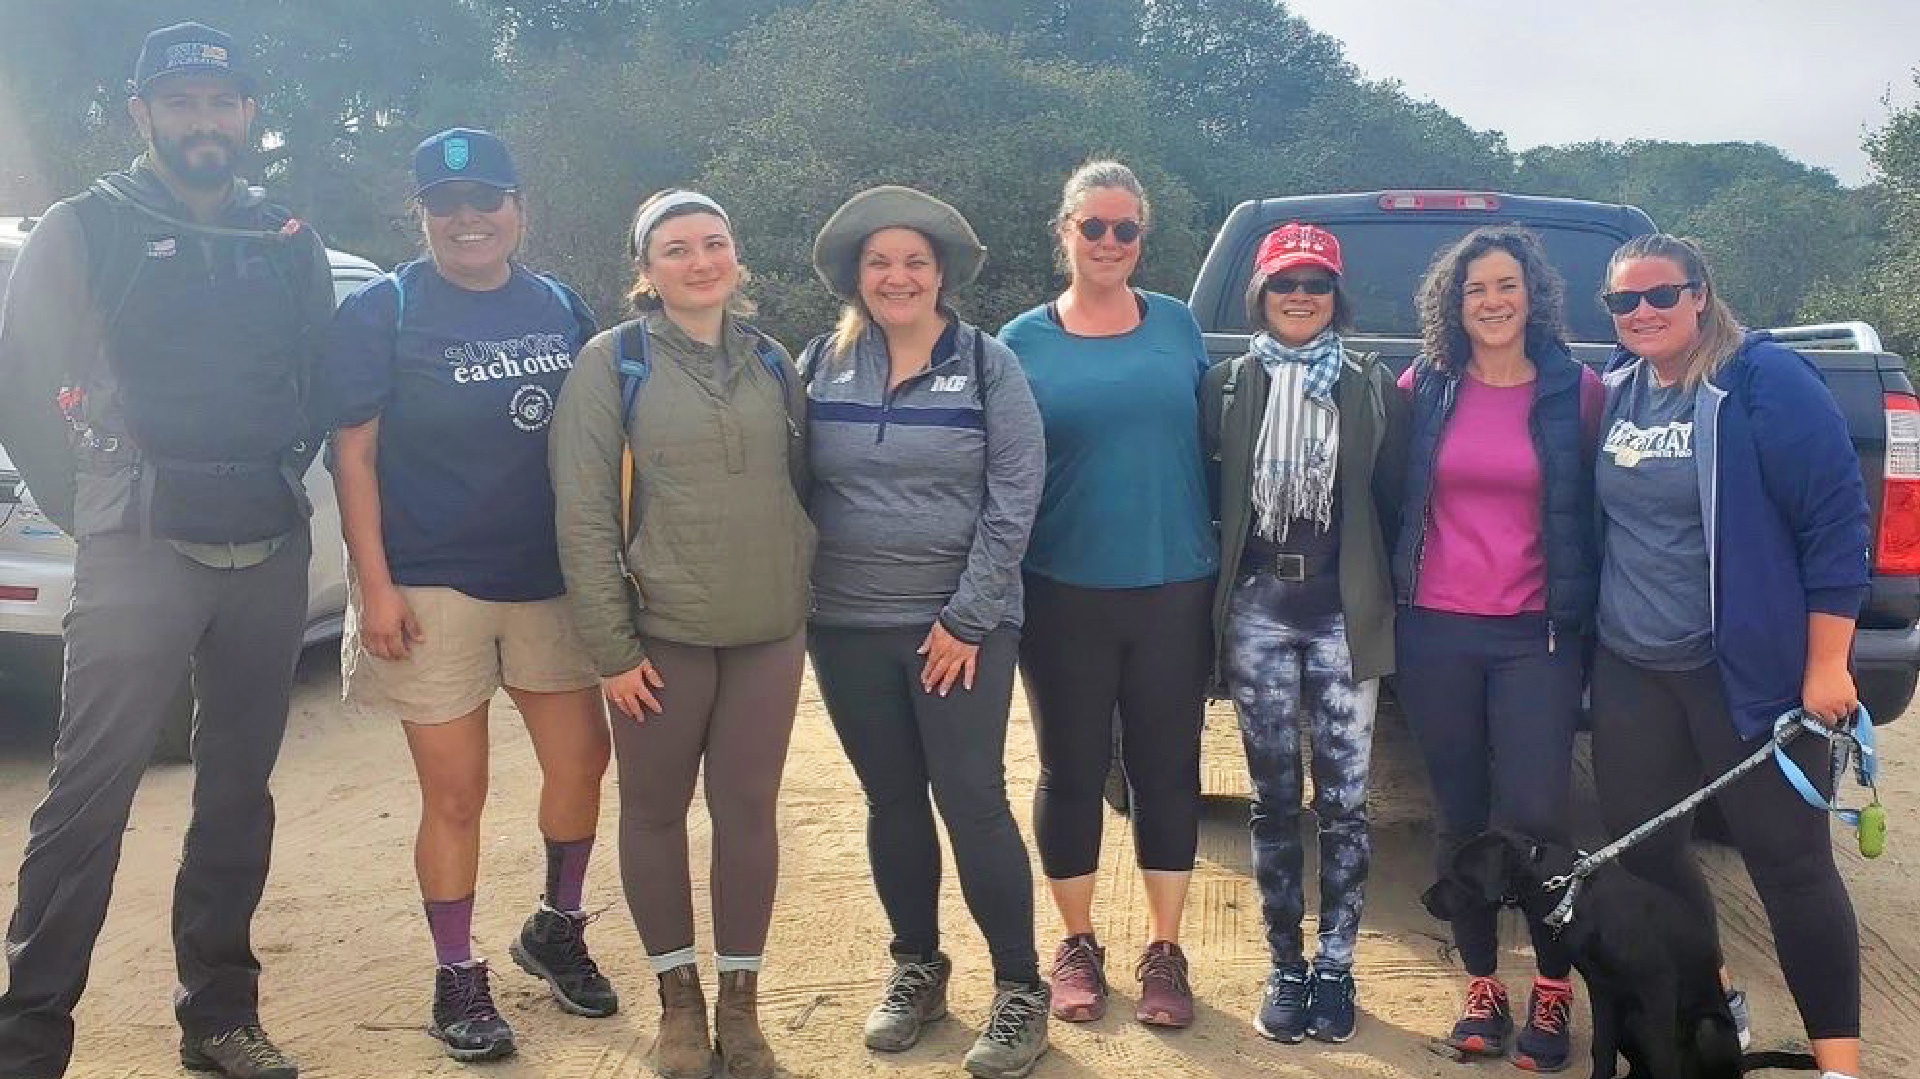 President Quiñones at Fort Ord hiking with the campus community members